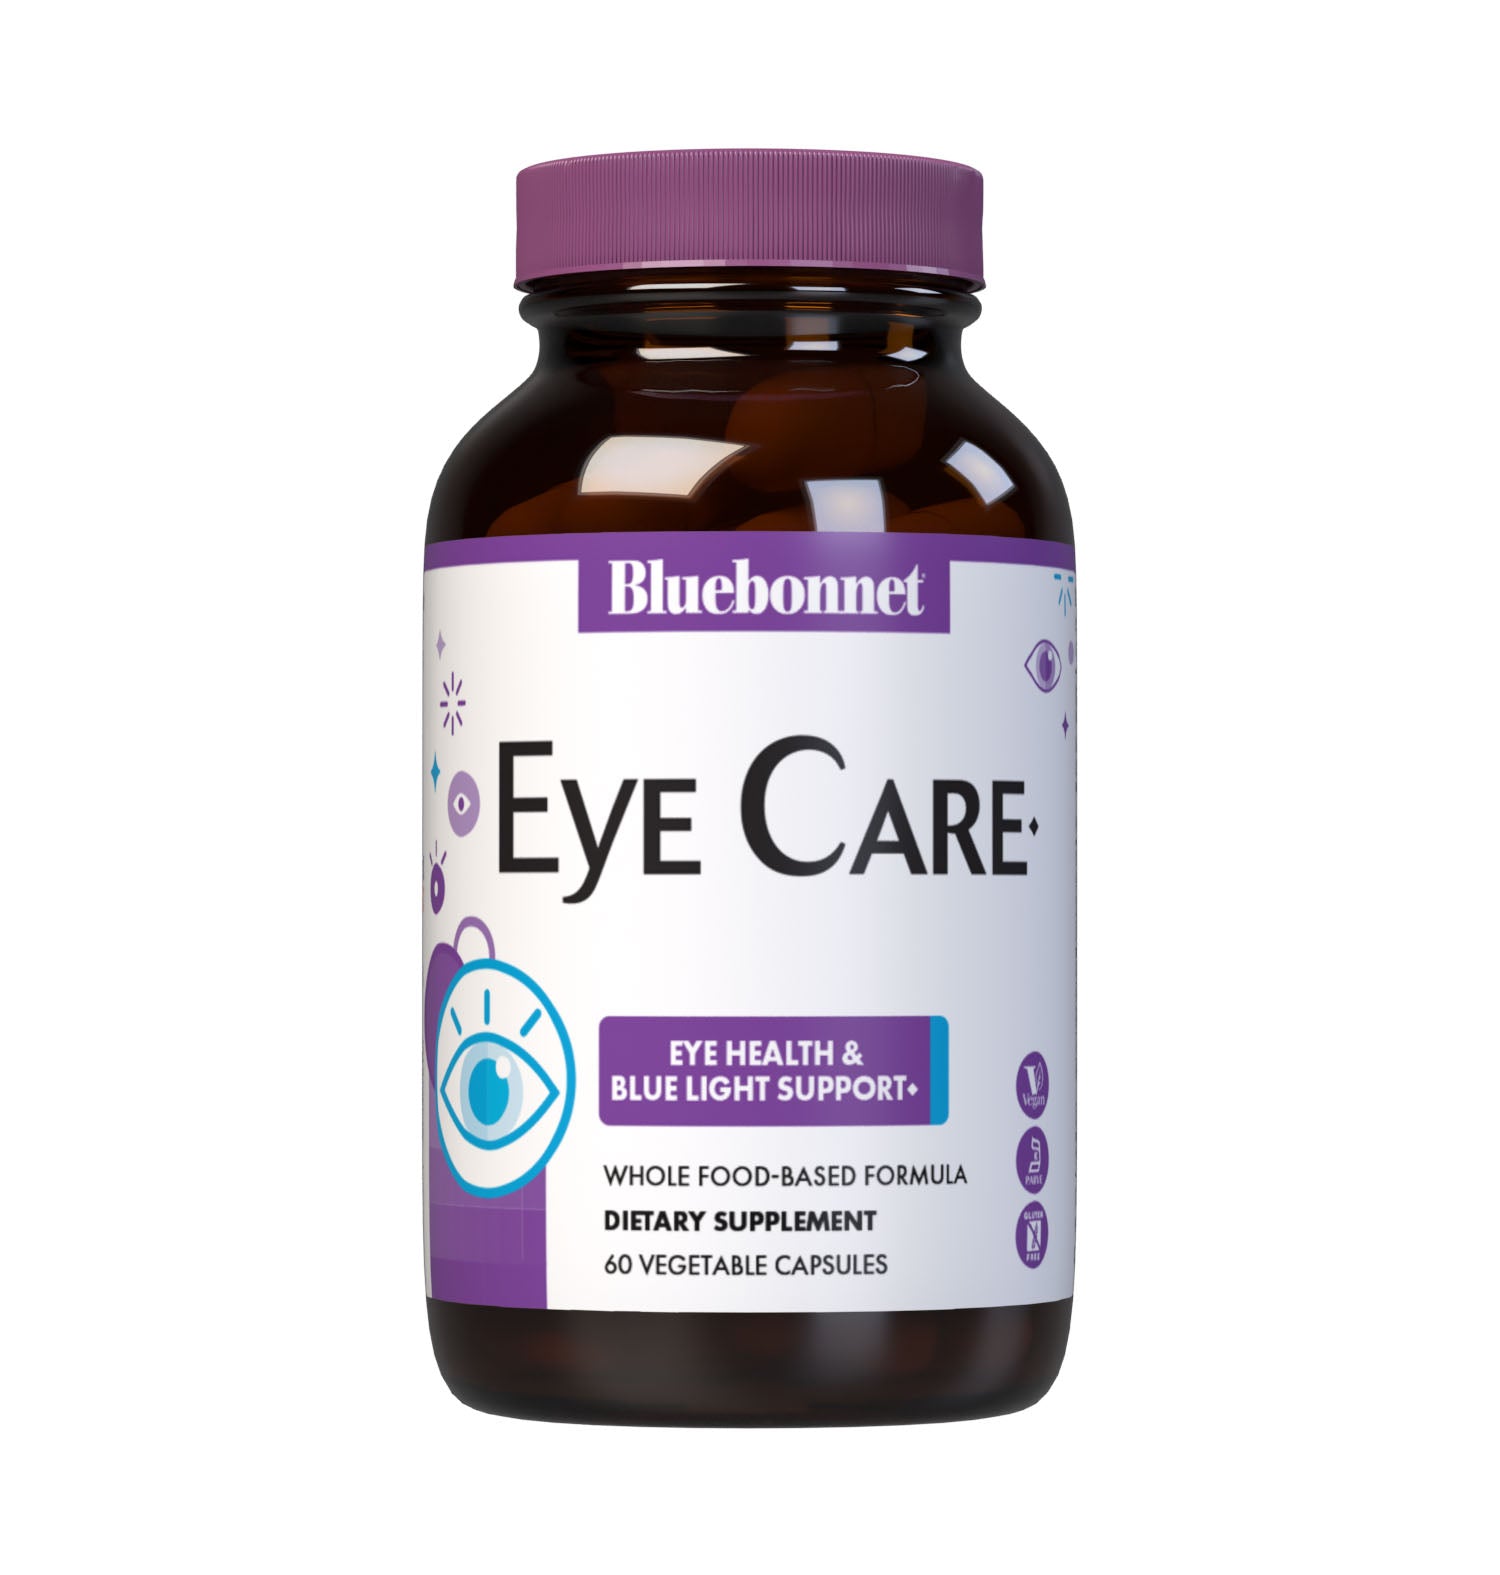 Bluebonnet’s Targeted Choice EyeCare 60 Vegetable Capsules are specially formulated to help protect eyes from blue light (e.g., LED) with the clinically studied nutrients, as well as hyaluronic acid and sustainably harvested or wildcrafted super fruits. Shielding the eyes from photo stress caused by blue light from high tech devices like computer, smartphone and tablet screens may improve visual performance and support healthy eyes for years to come. #size_60 count